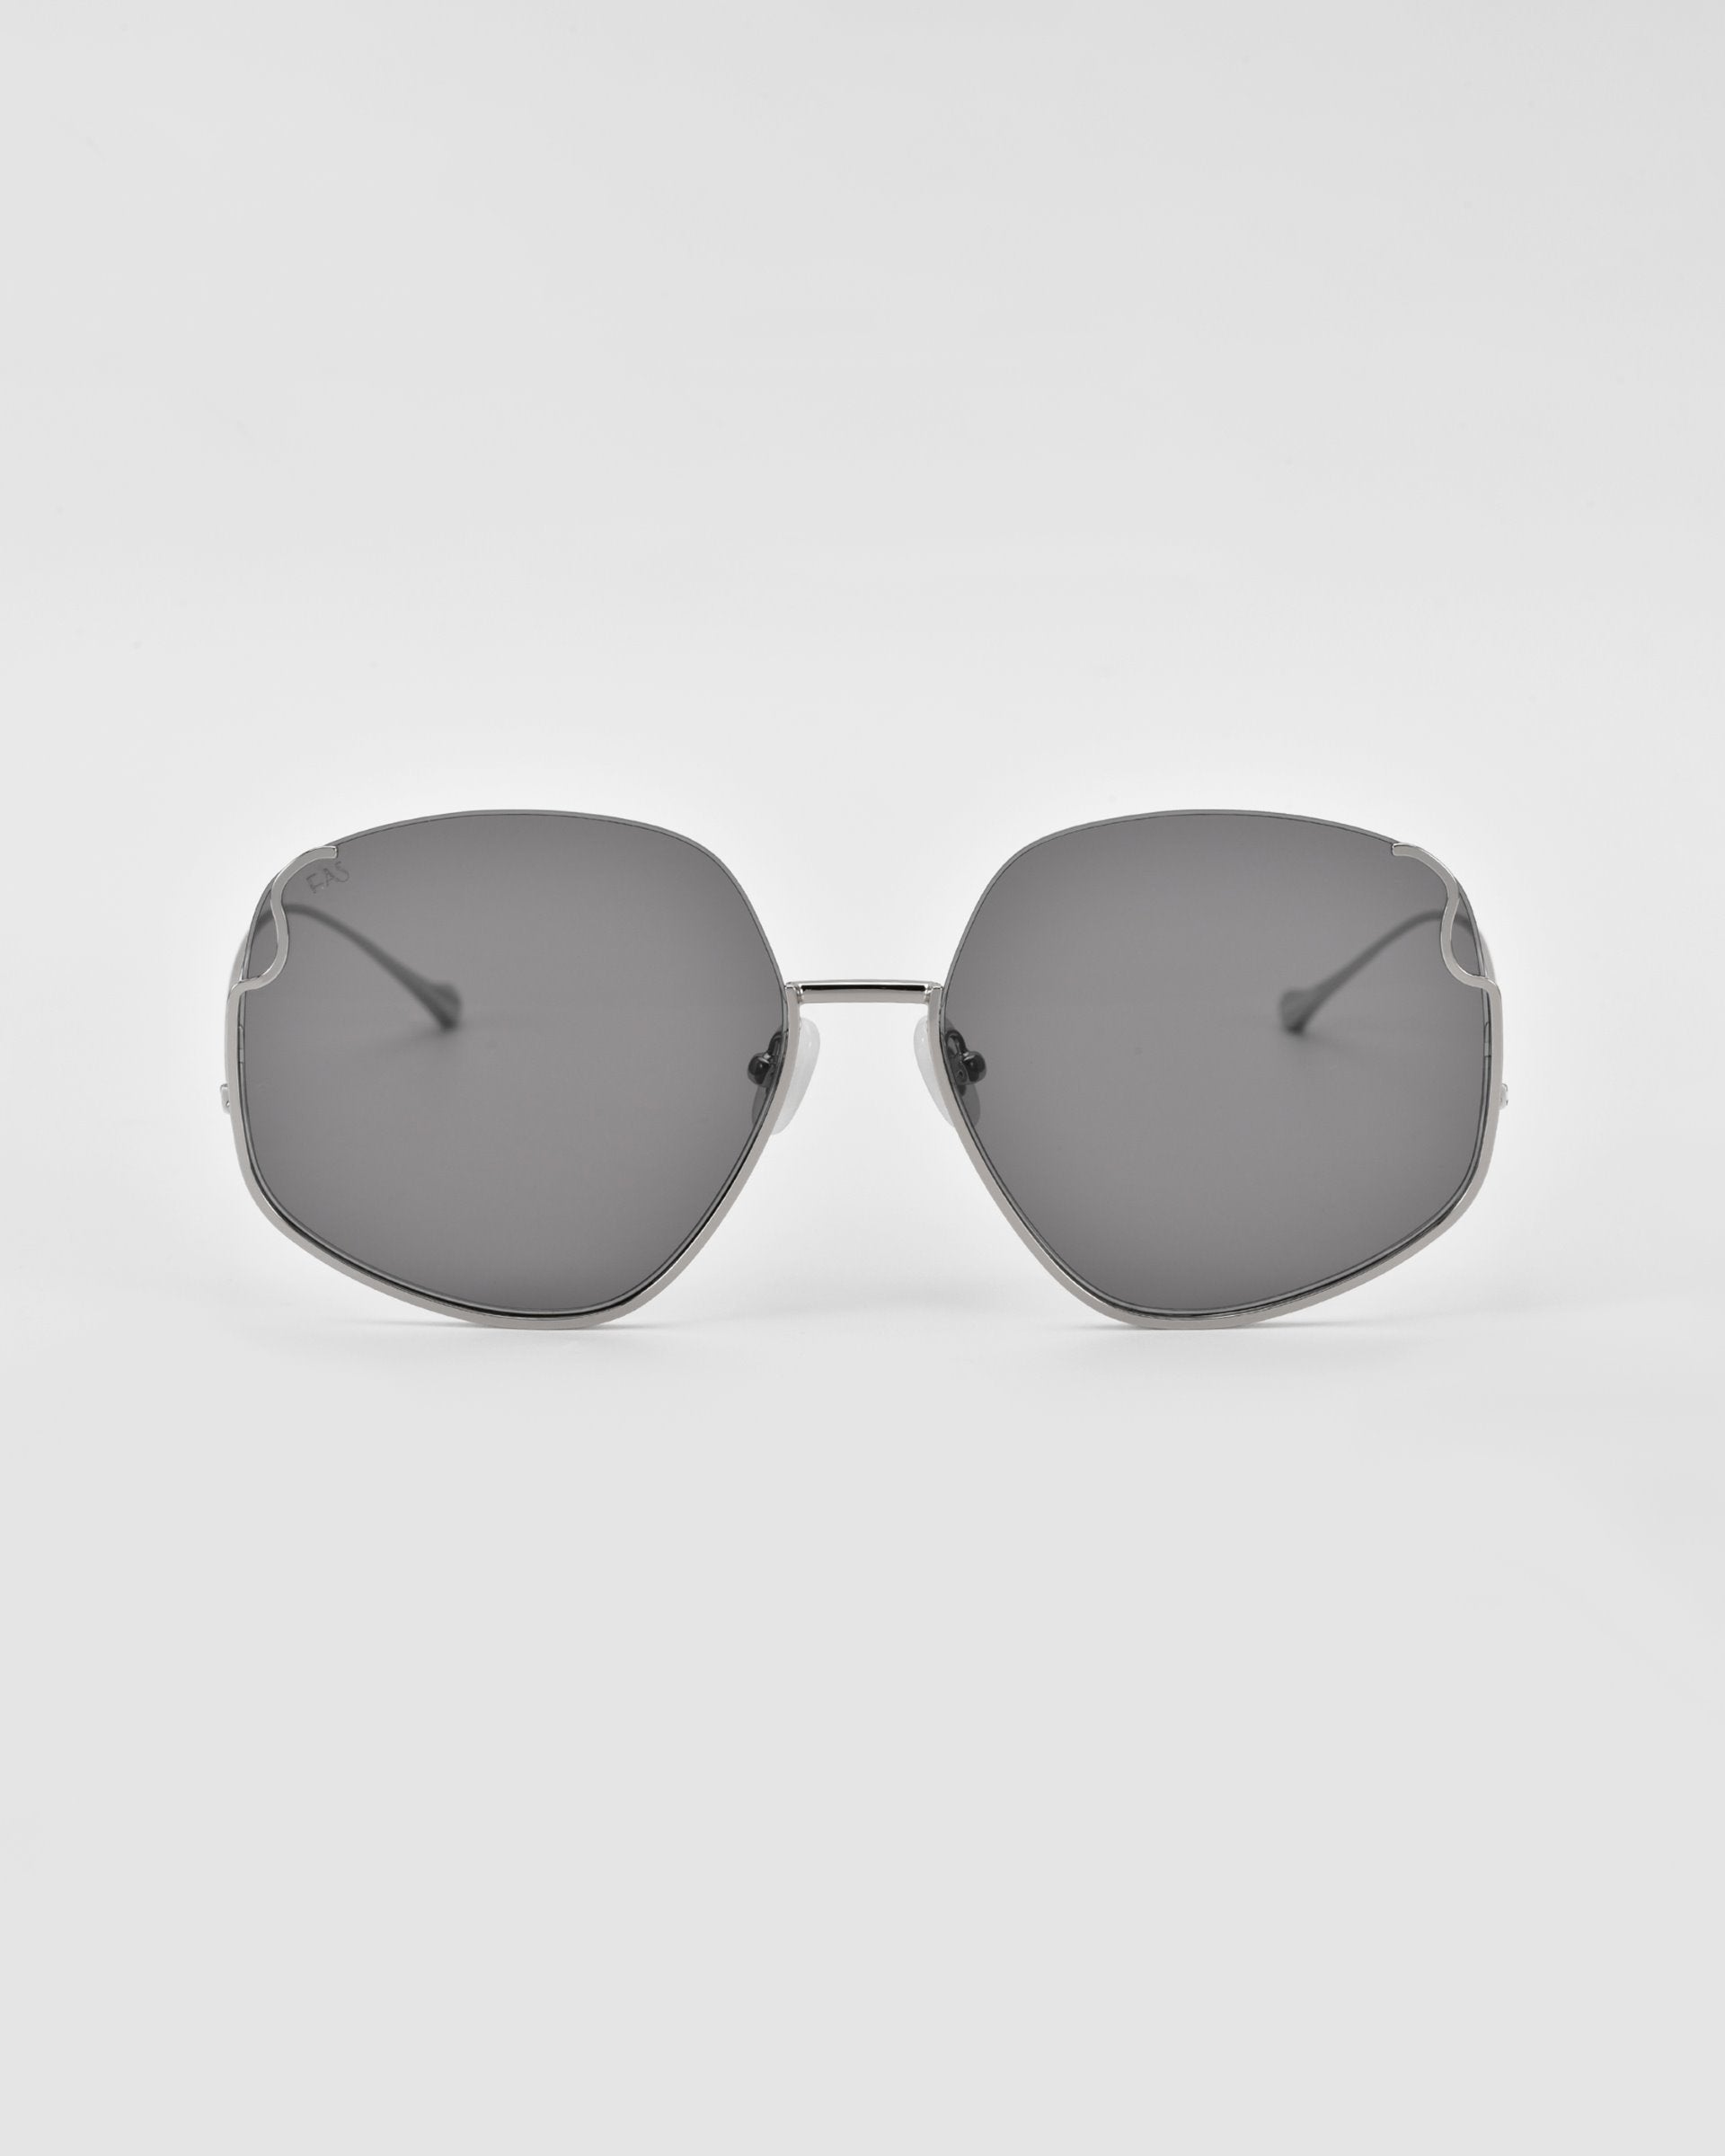 A pair of luxurious Drape sunglasses from For Art's Sake® with large, dark tinted lenses and thin metal frames featuring intricate metal detailing. The design is minimalistic with clean lines, providing a sophisticated look. The background is plain white, highlighting the Drape sunglasses from For Art's Sake®.